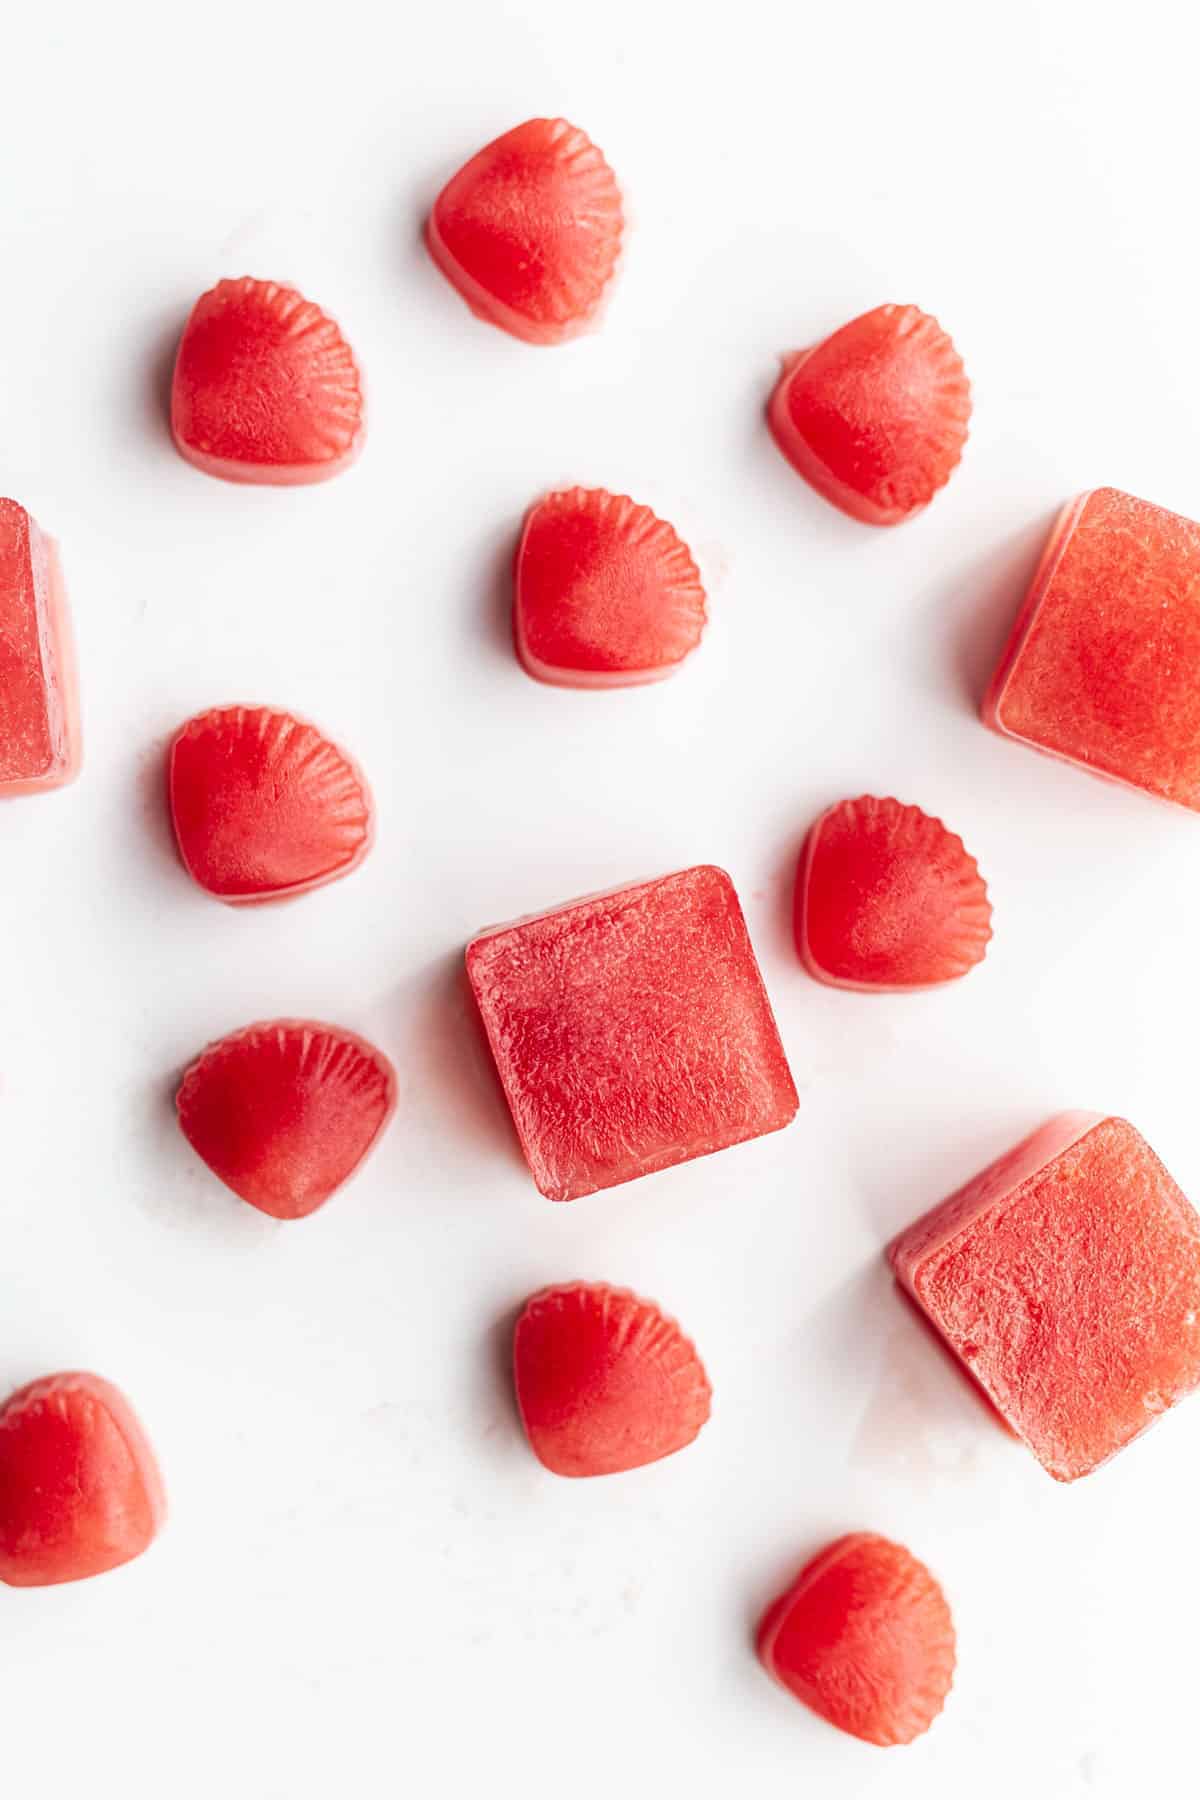 Bright red Frozen Watermelon and Coconut Water Ice Cubes in small square and sea shell shapes